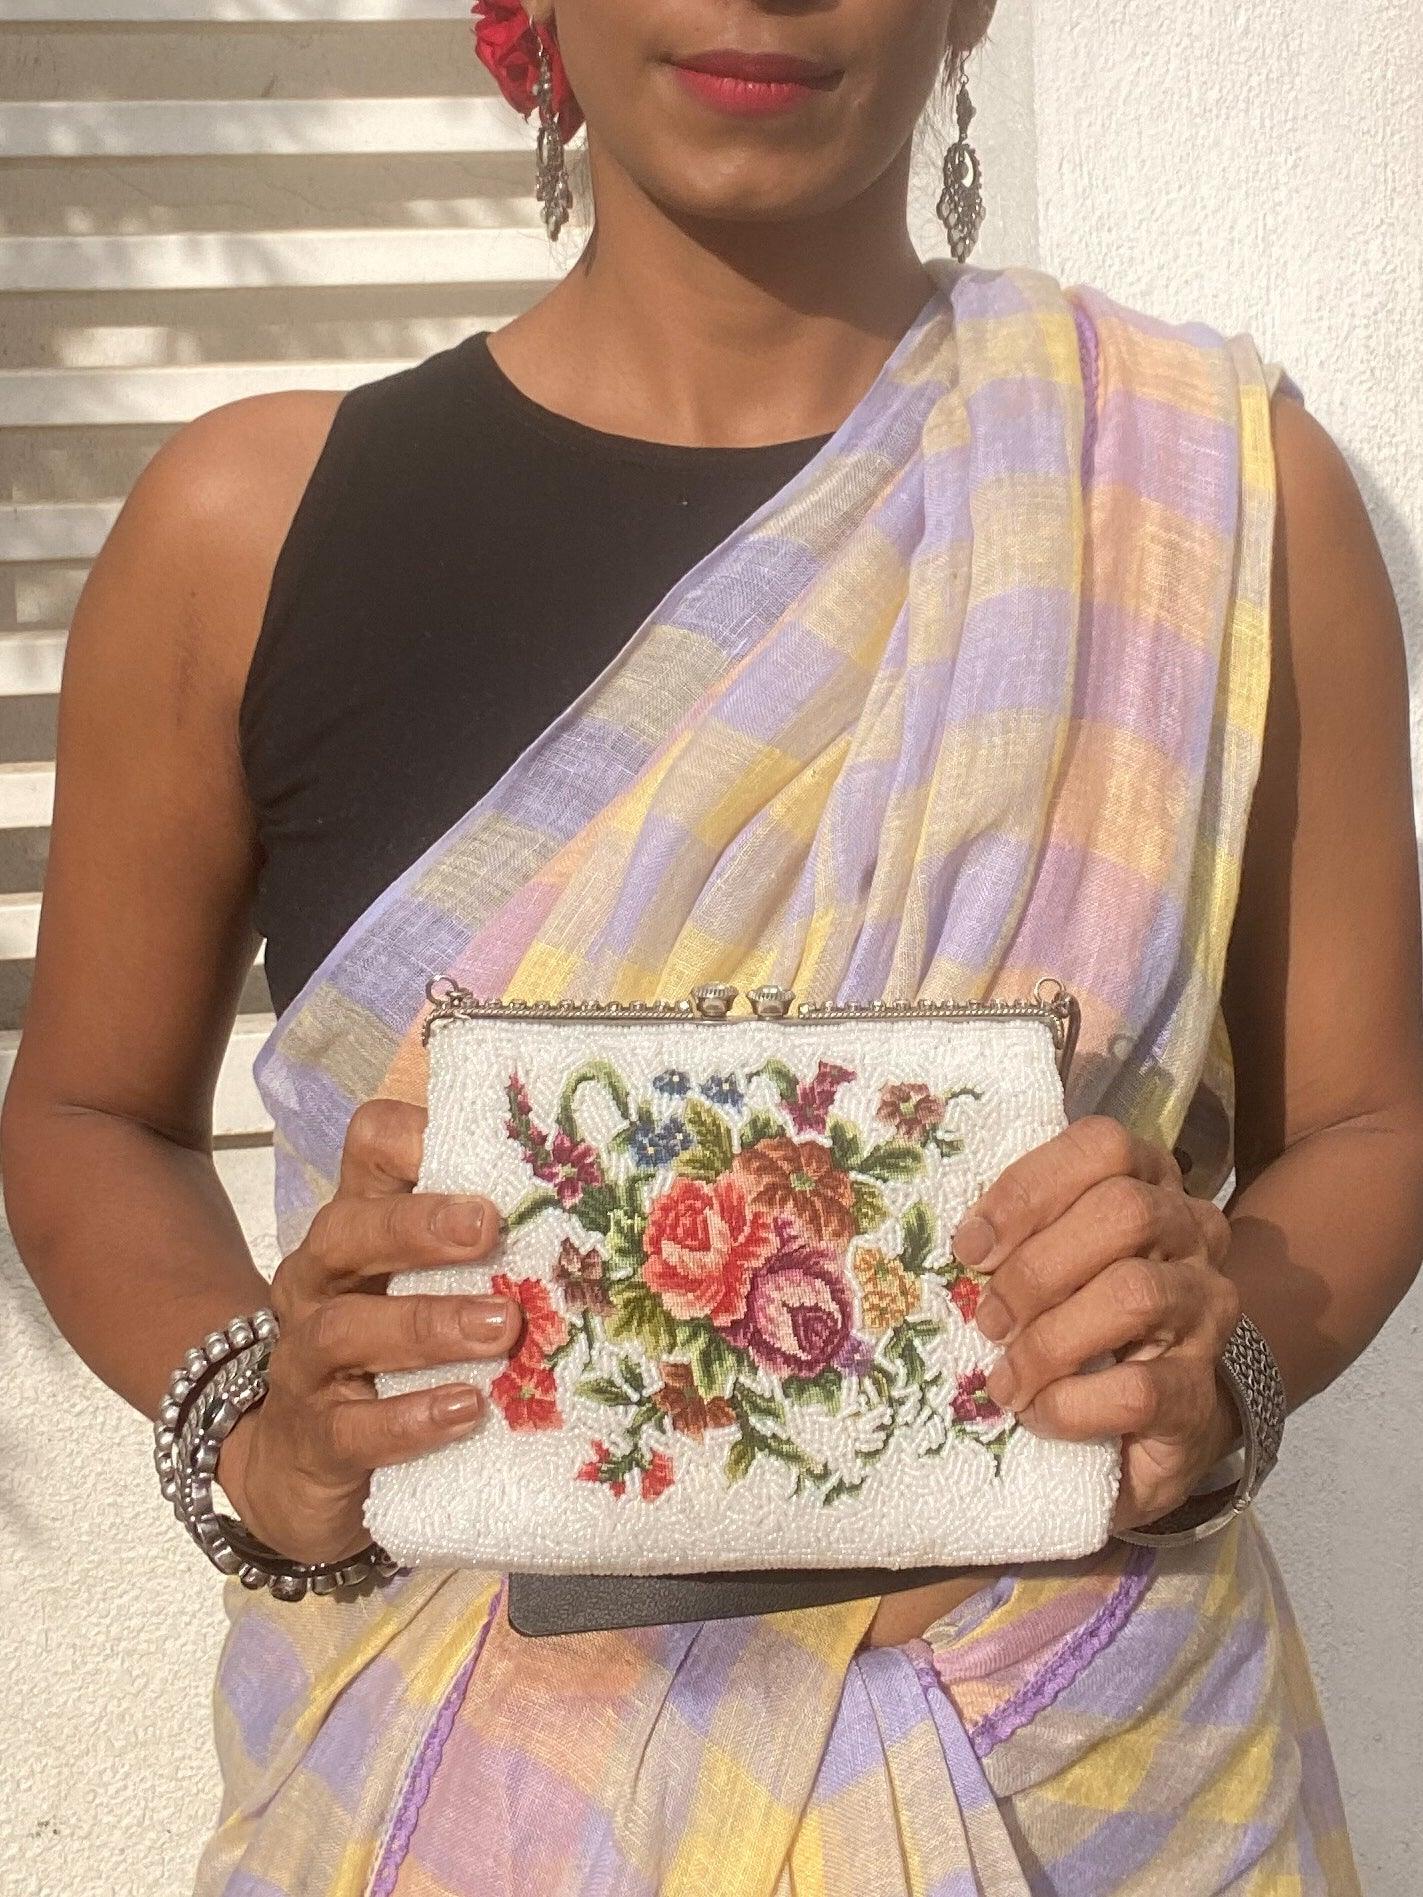 Vintage Beaded Purse with Petit Point from 1950s - Rachana Reddy